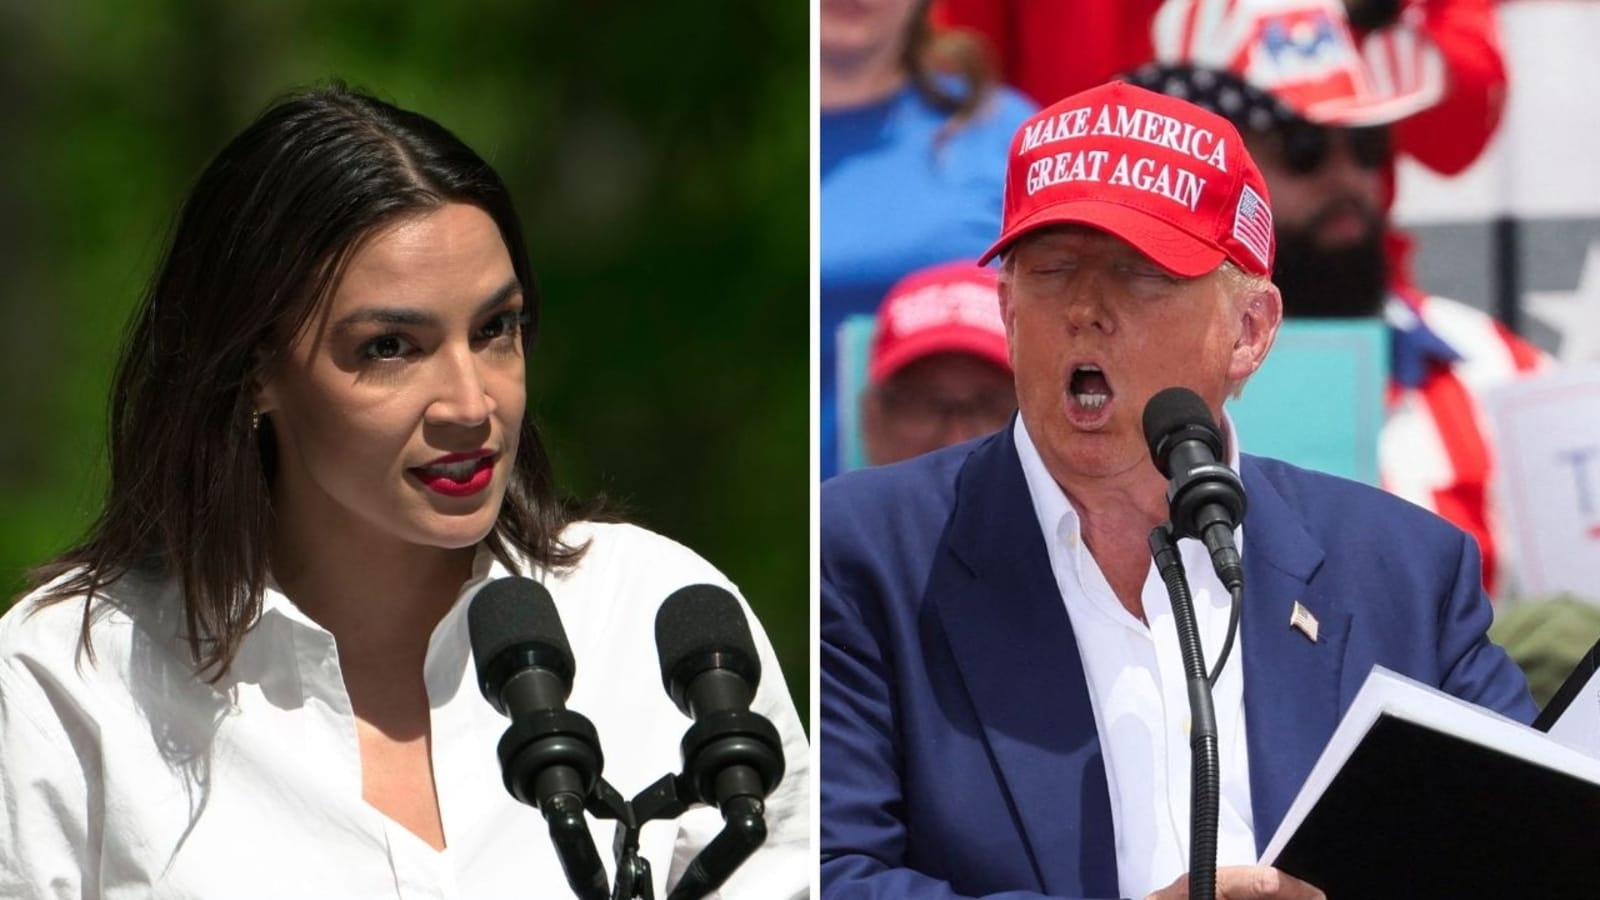 AOC says she wouldn't be surprised if Donald Trump thew her in jail if he is elected: ‘This is his motto’